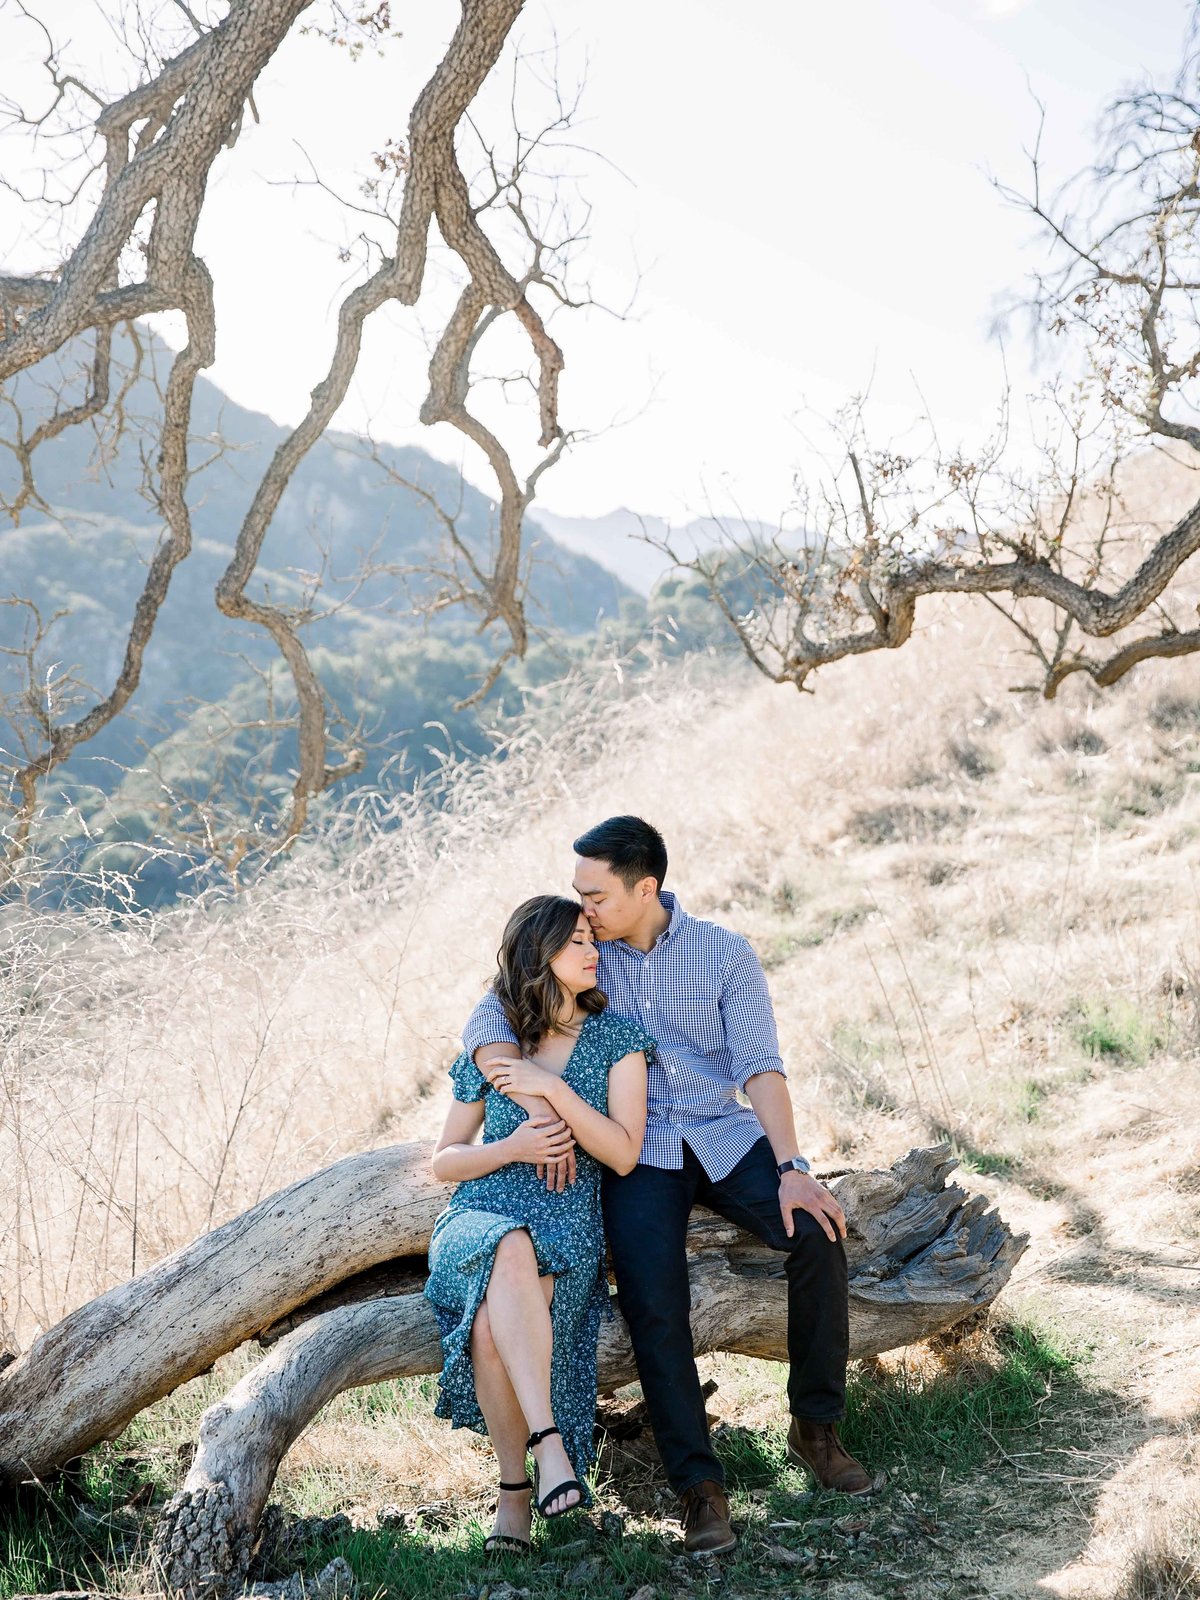 Babsie-Ly-Photography-malibu-creek-state-park-Engagement-Session-Film-Asian-Photographer-003